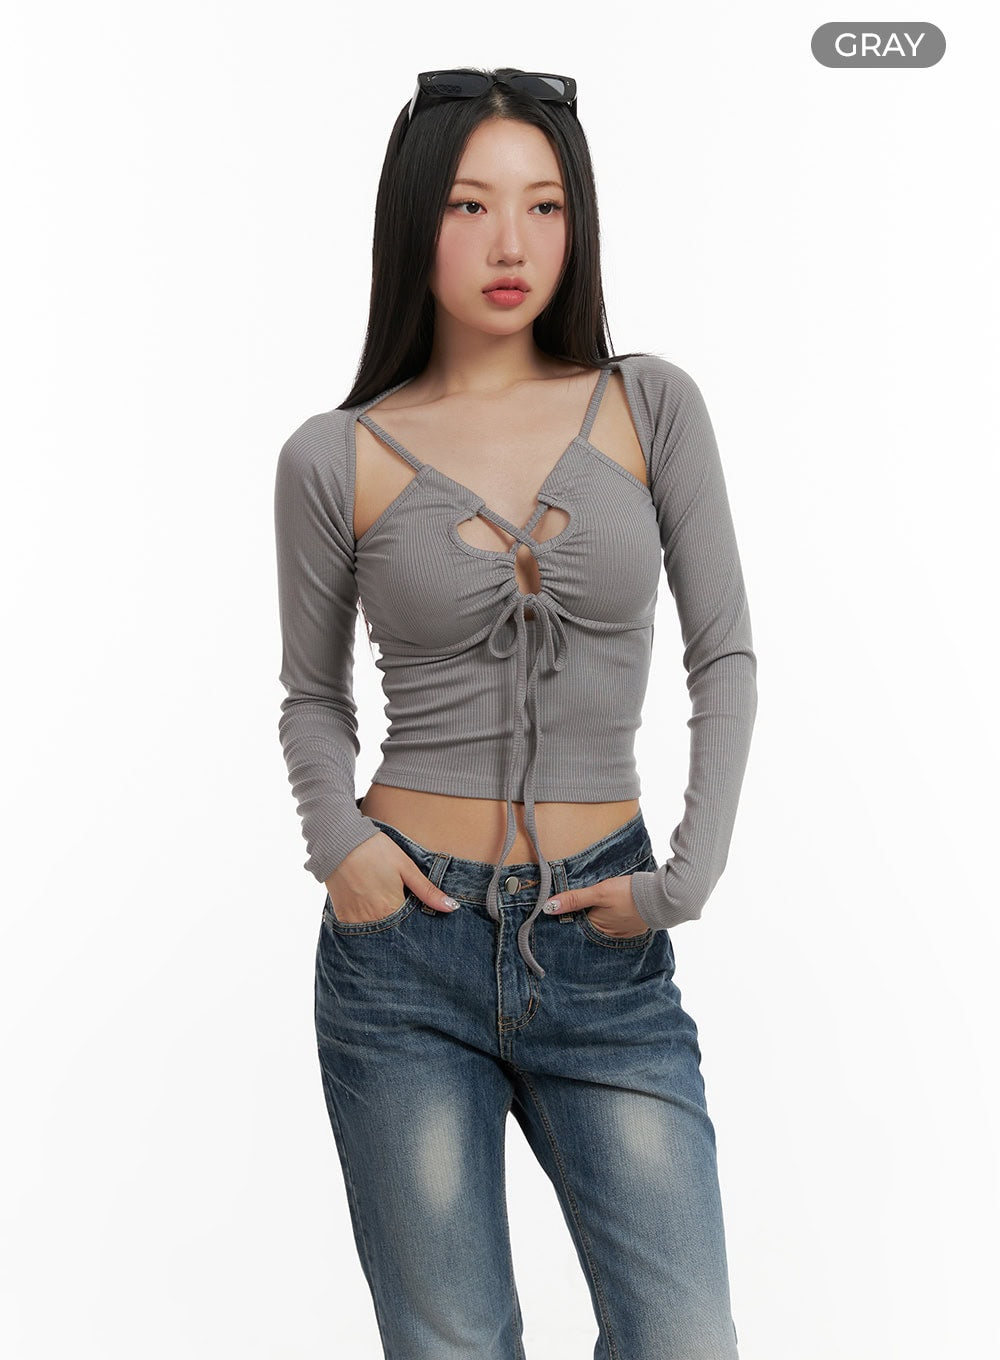 x-strap-cut-out-crop-top-cy403